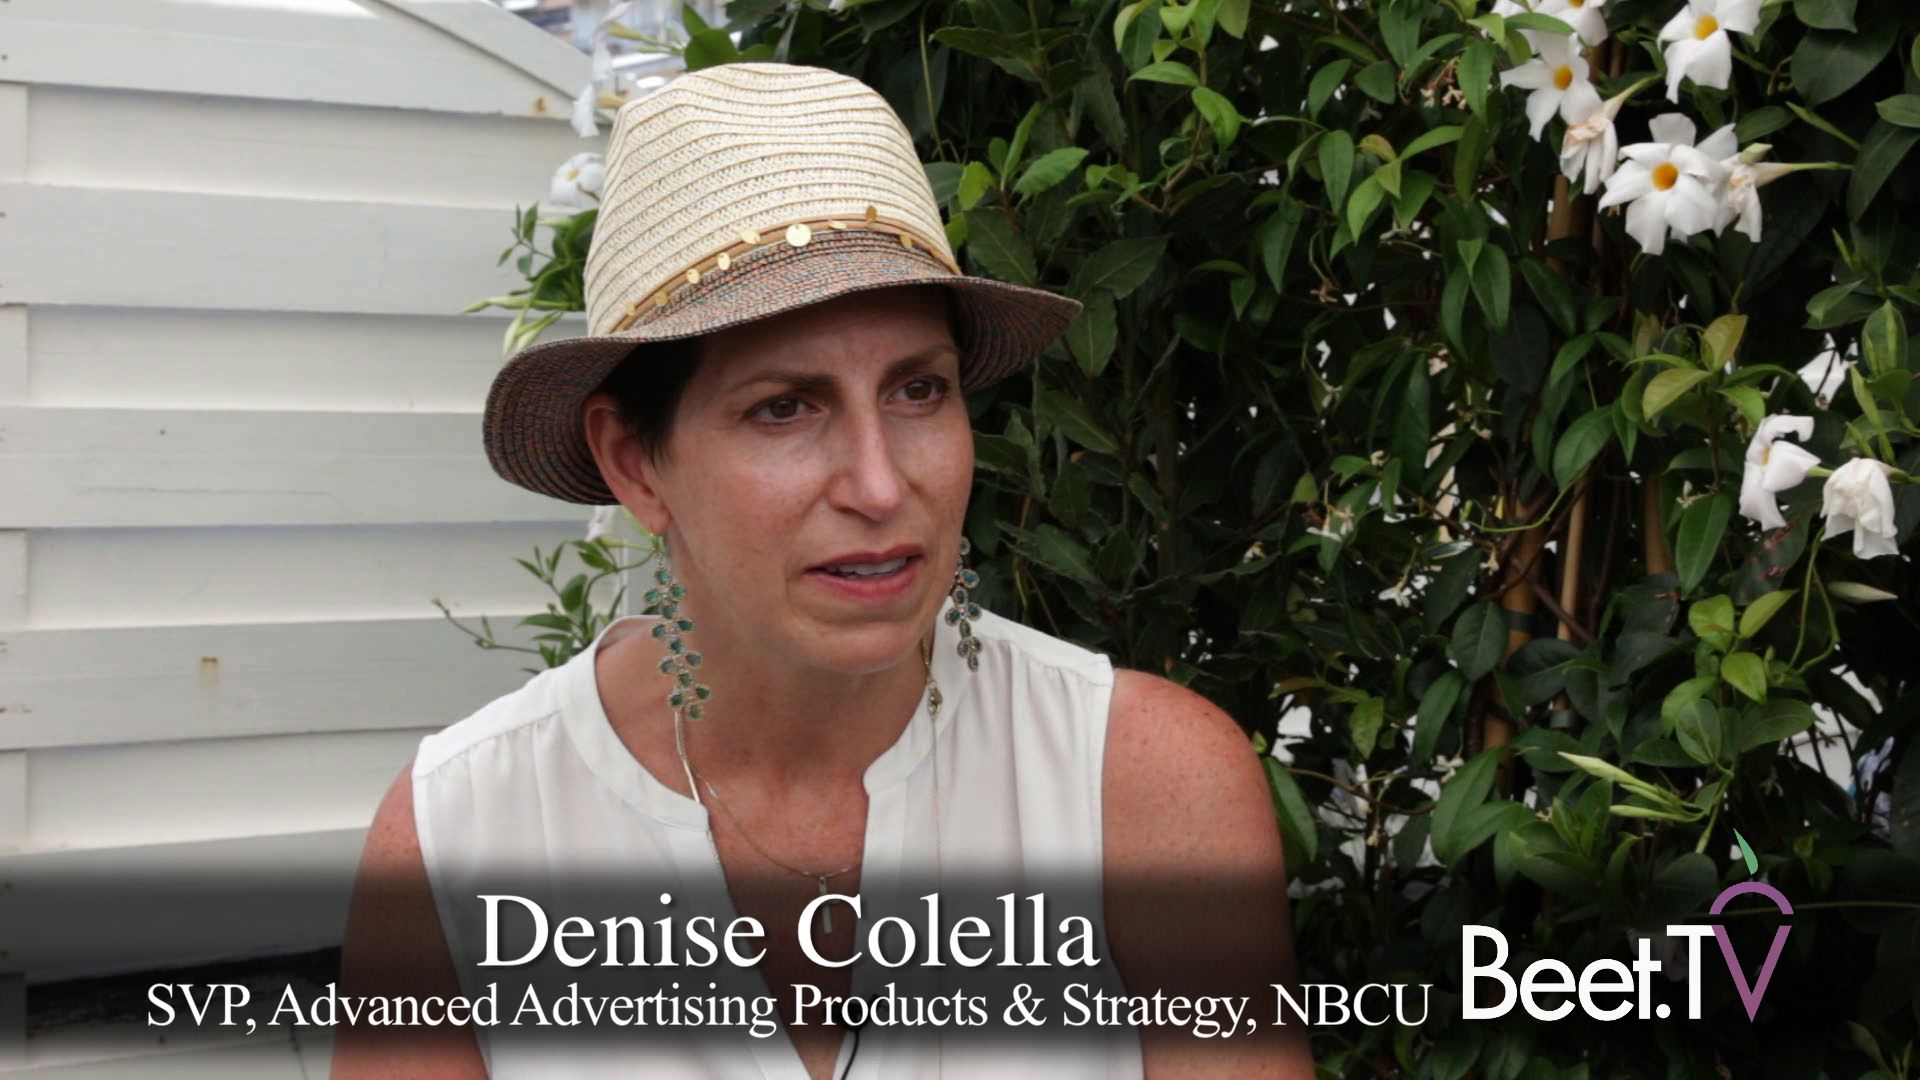 In A Cross-Platform World, You Need A Host Of Partners: NBCU’s Colella